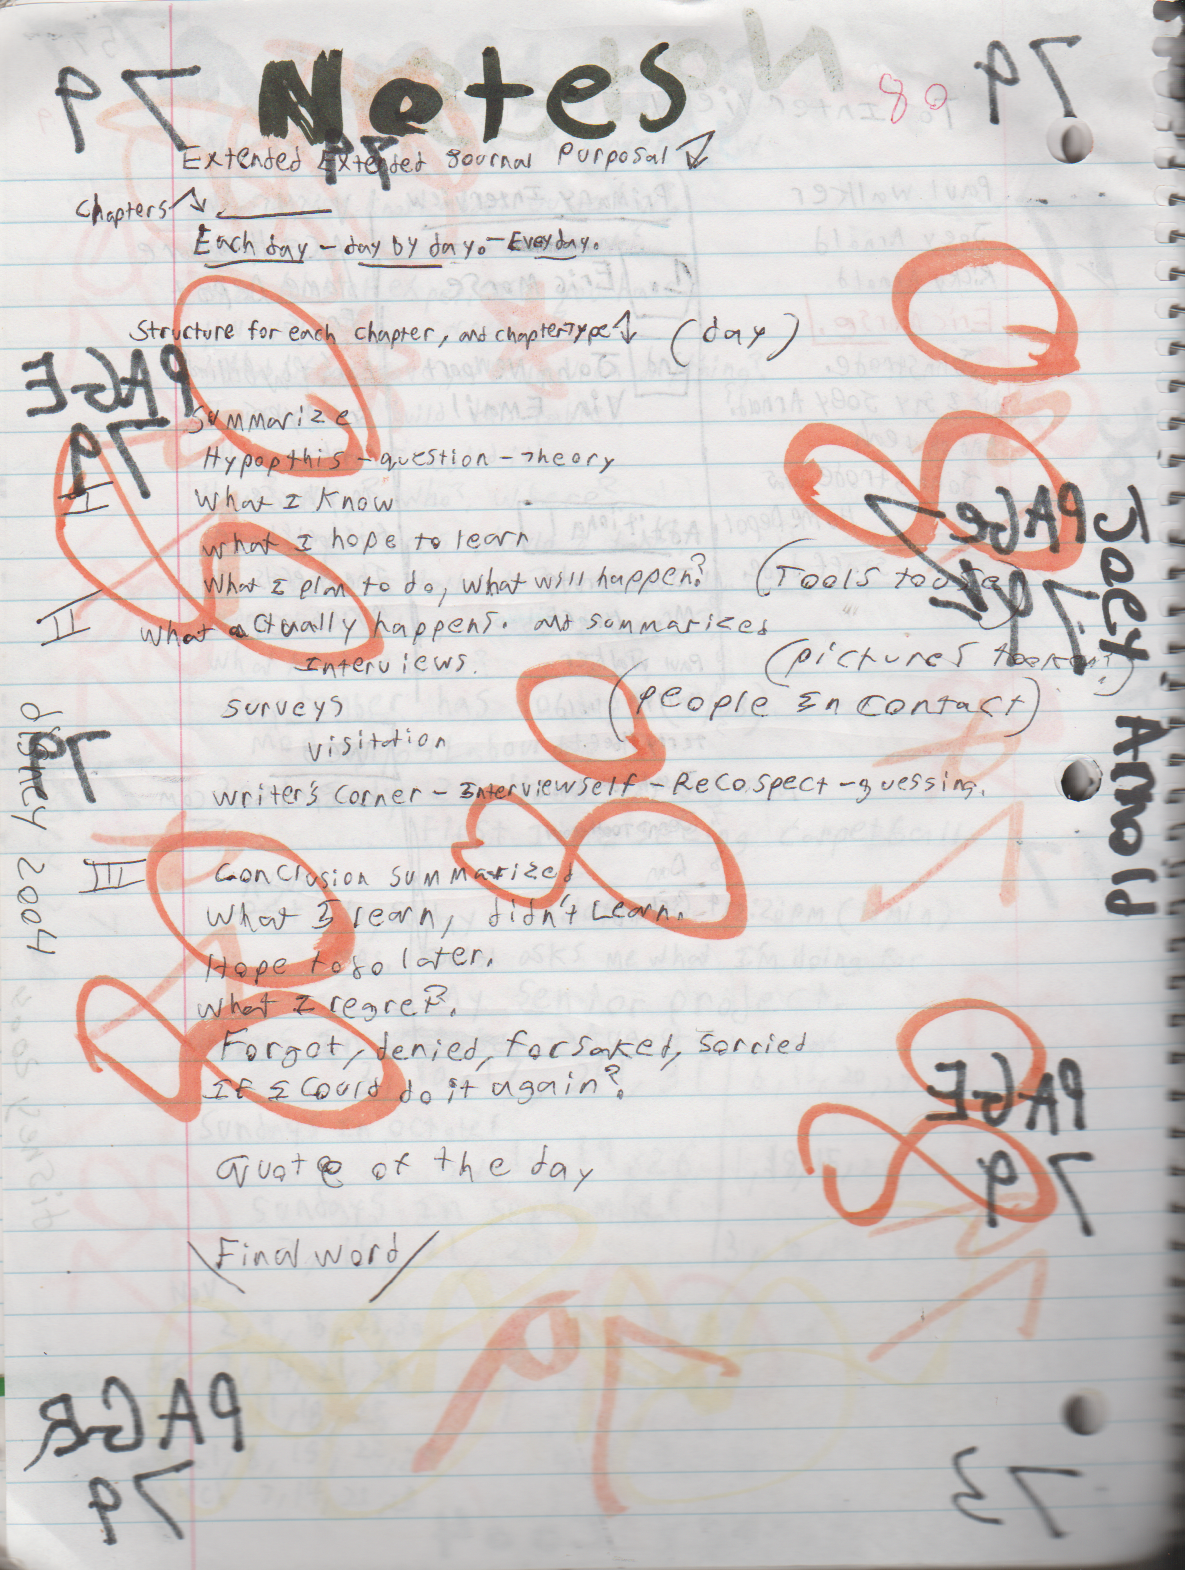 2004-01-29 - Thursday - Carpetball FGHS Senior Project Journal, Joey Arnold, Part 02, 96pages numbered, Notebook-78.png